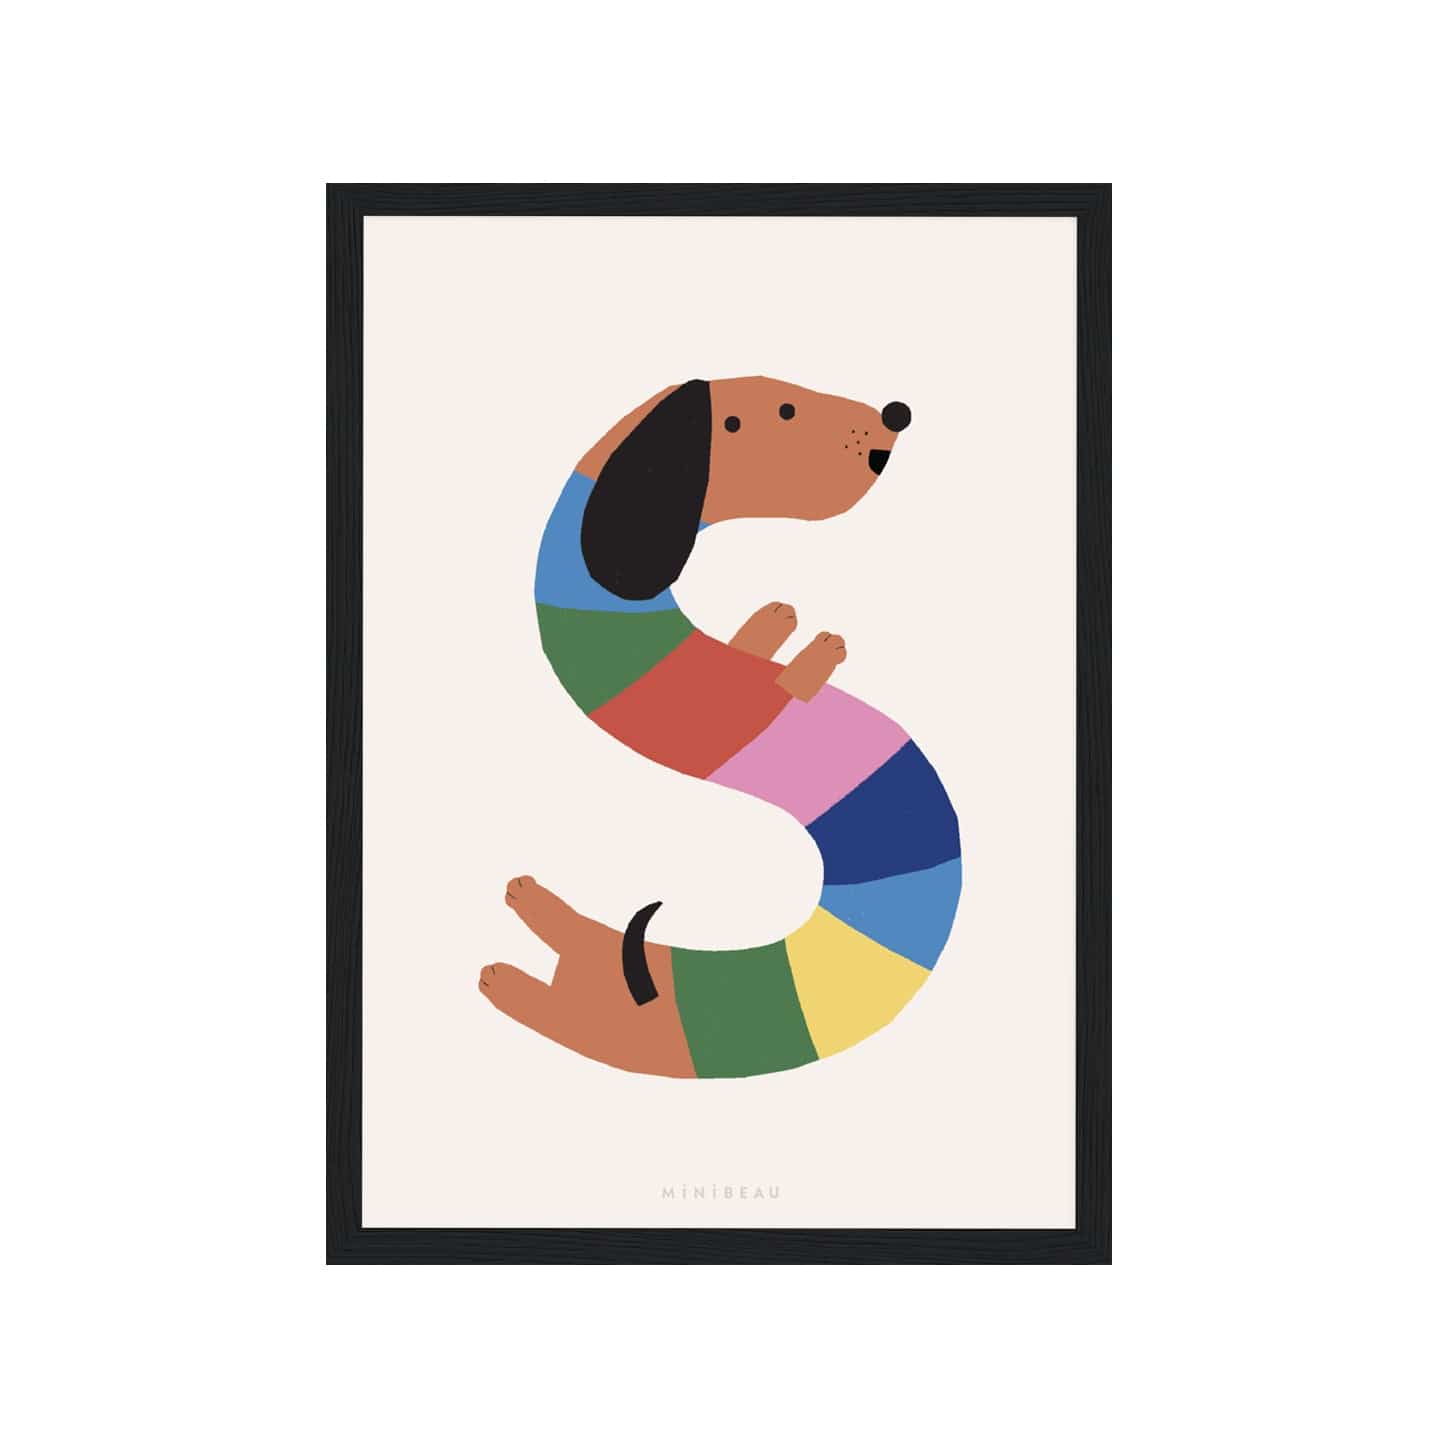 Art print in a black frame. Our Happy Alphabet 'S' Art Print shows a rainbow-striped sausage dog forming the shape of an S on a neutral background.